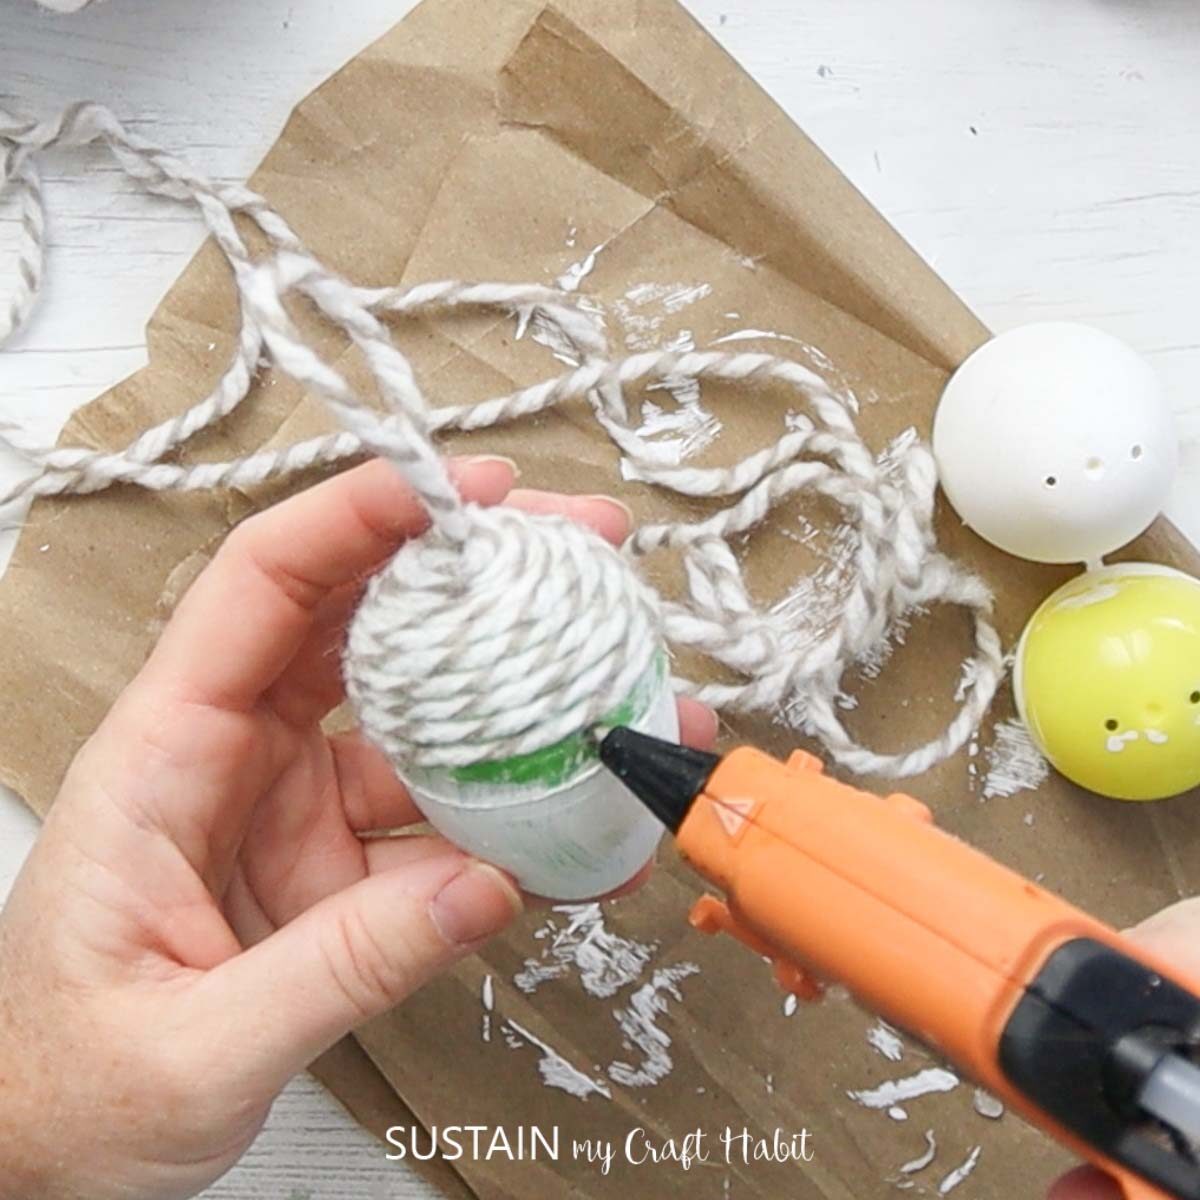 Adding glue on the middle of the plastic egg.